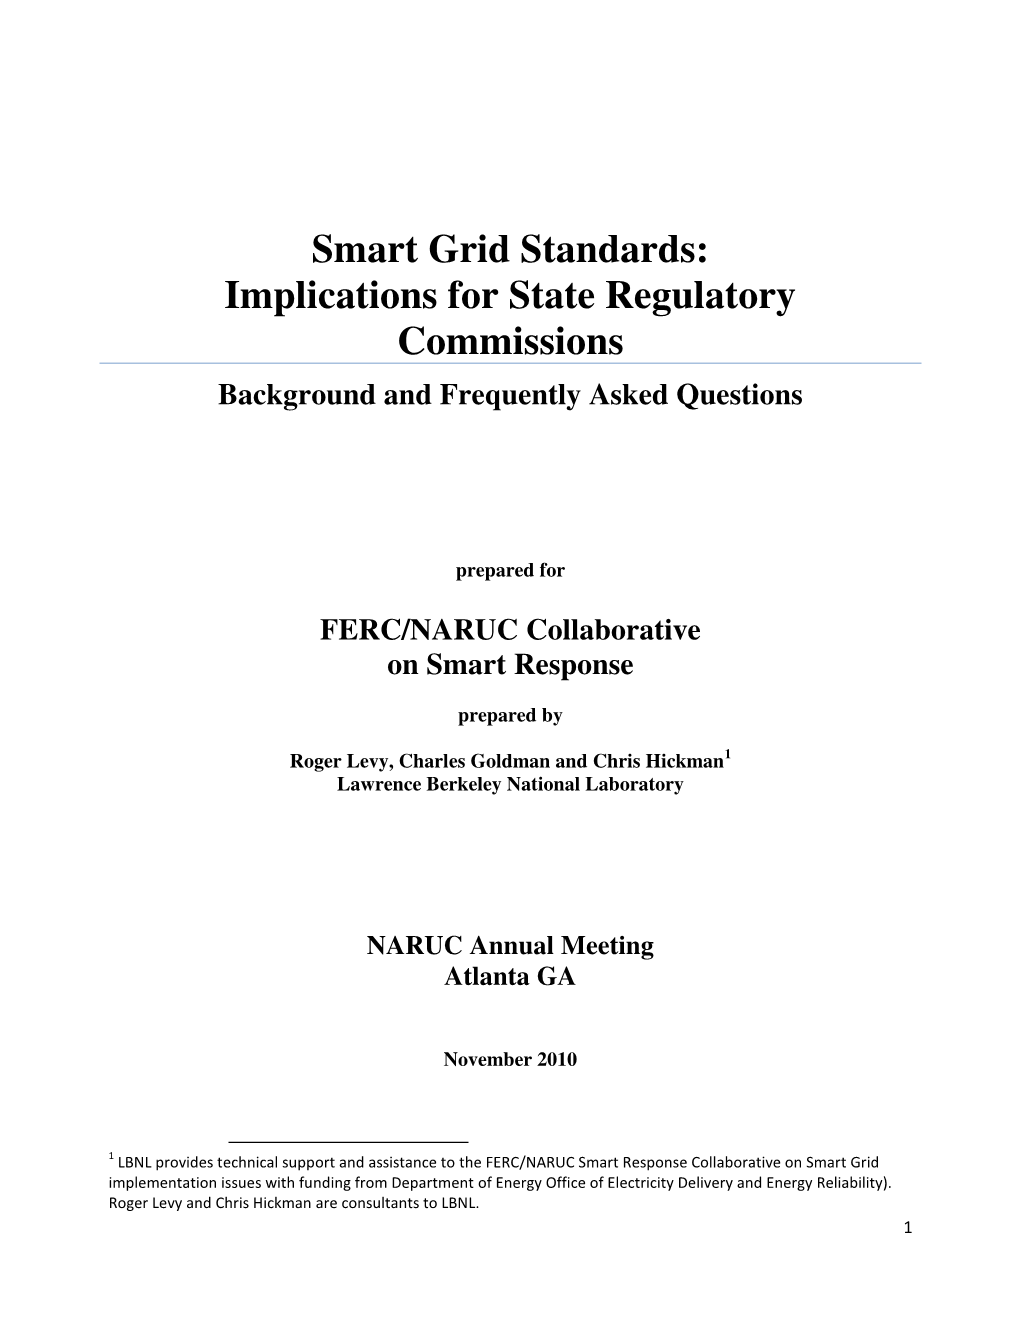 Smart Grid Standards: Implications for State Regulatory Commissions Background and Frequently Asked Questions